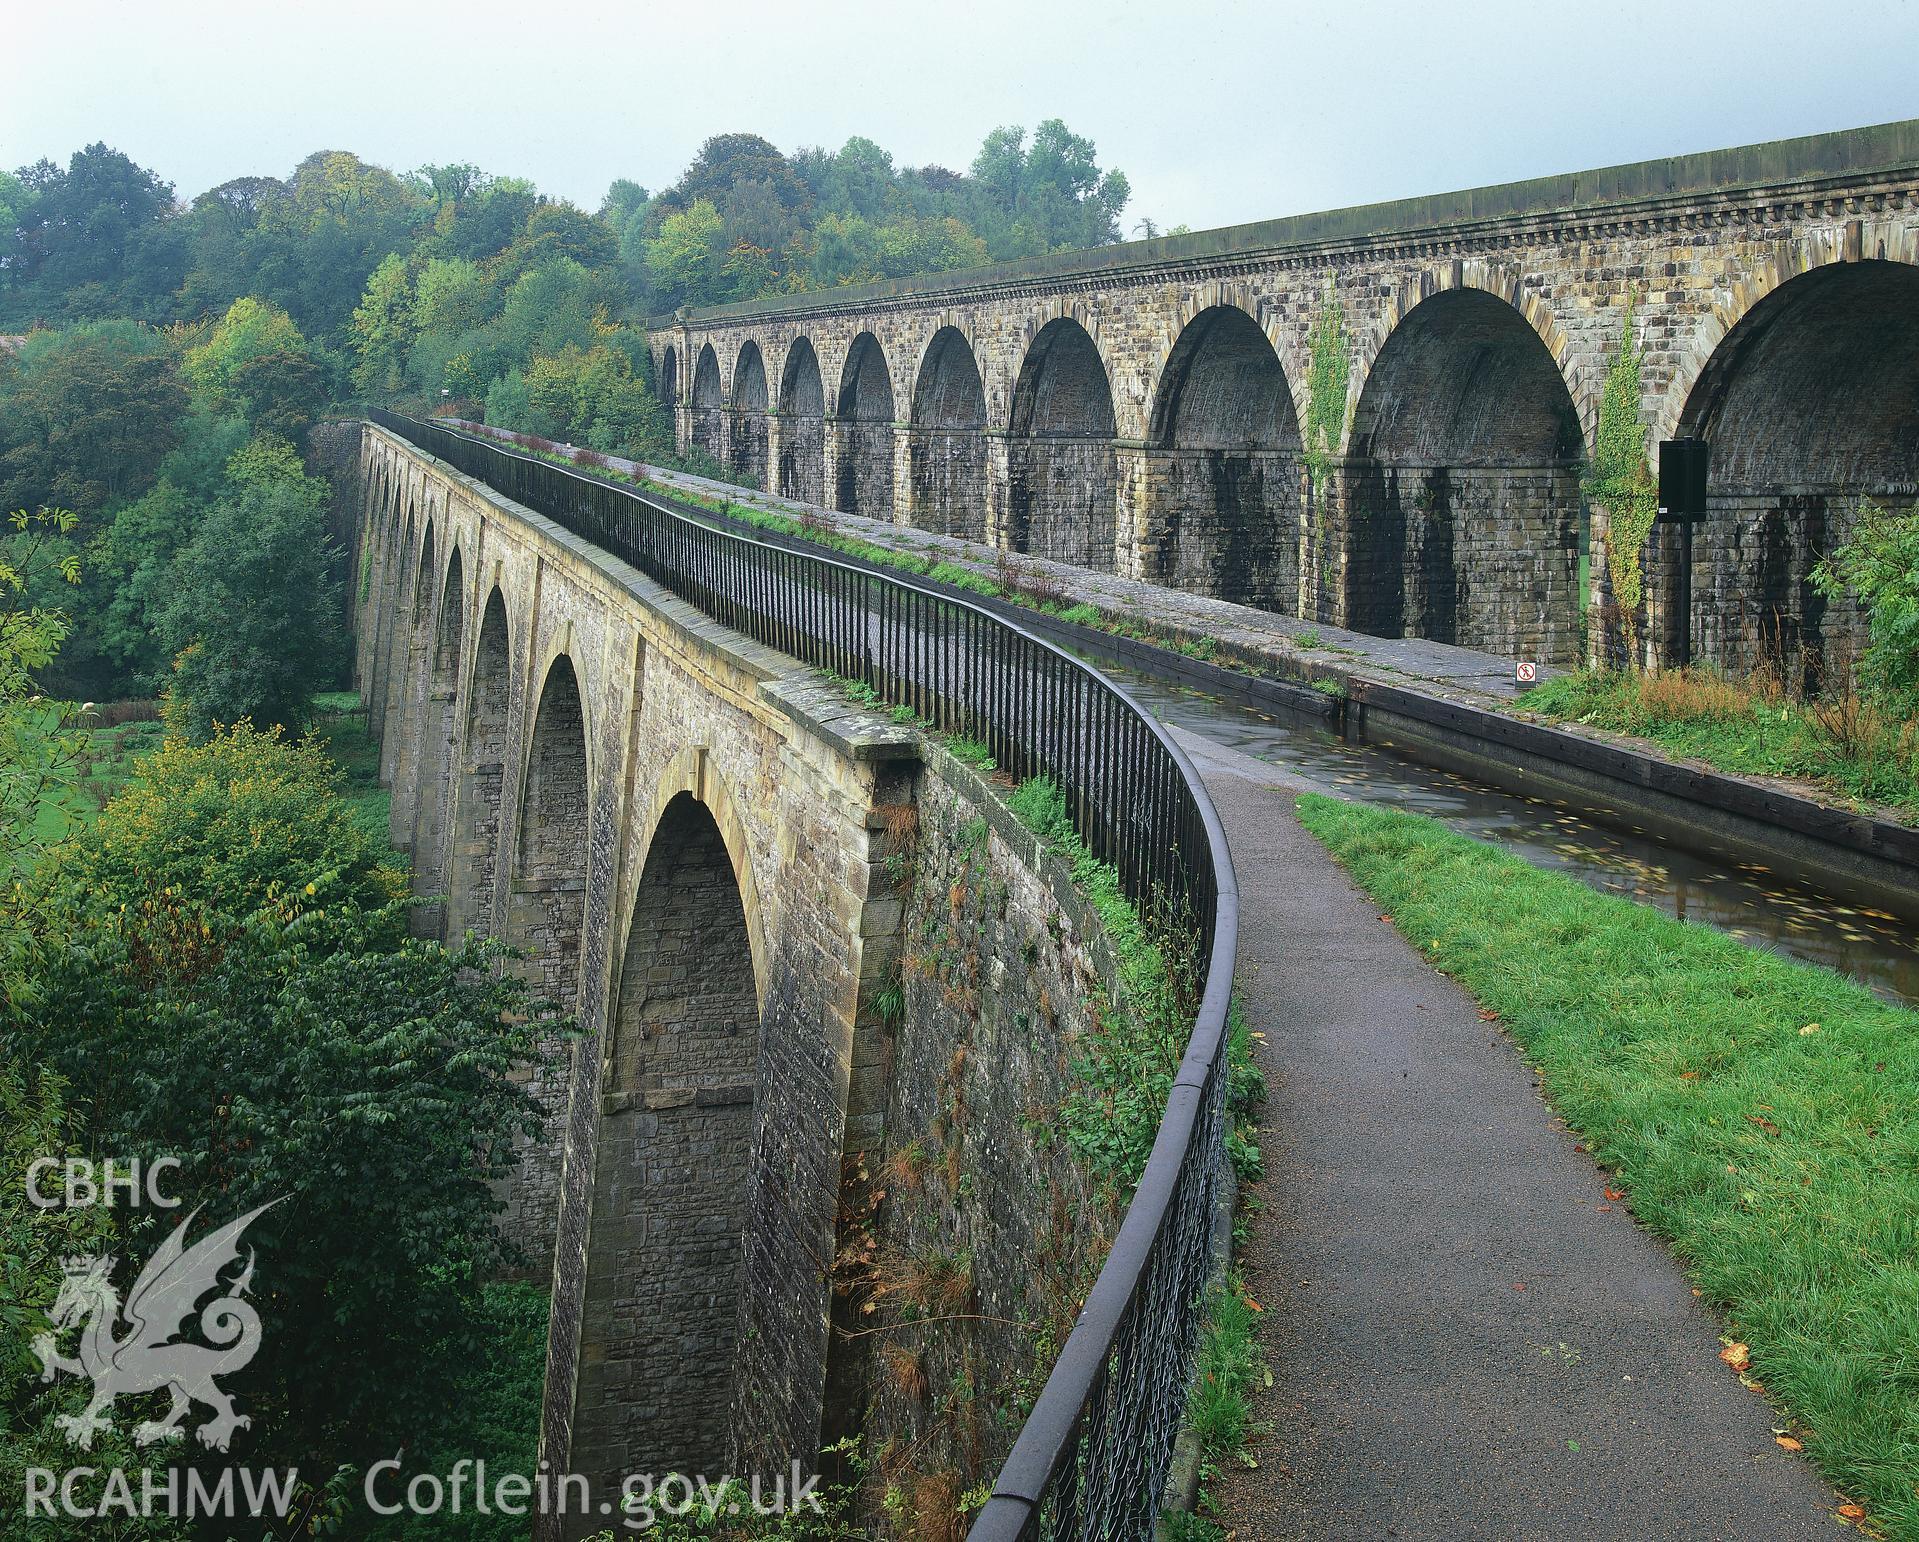 RCAHMW colour transparency of Chirk Aqueduct